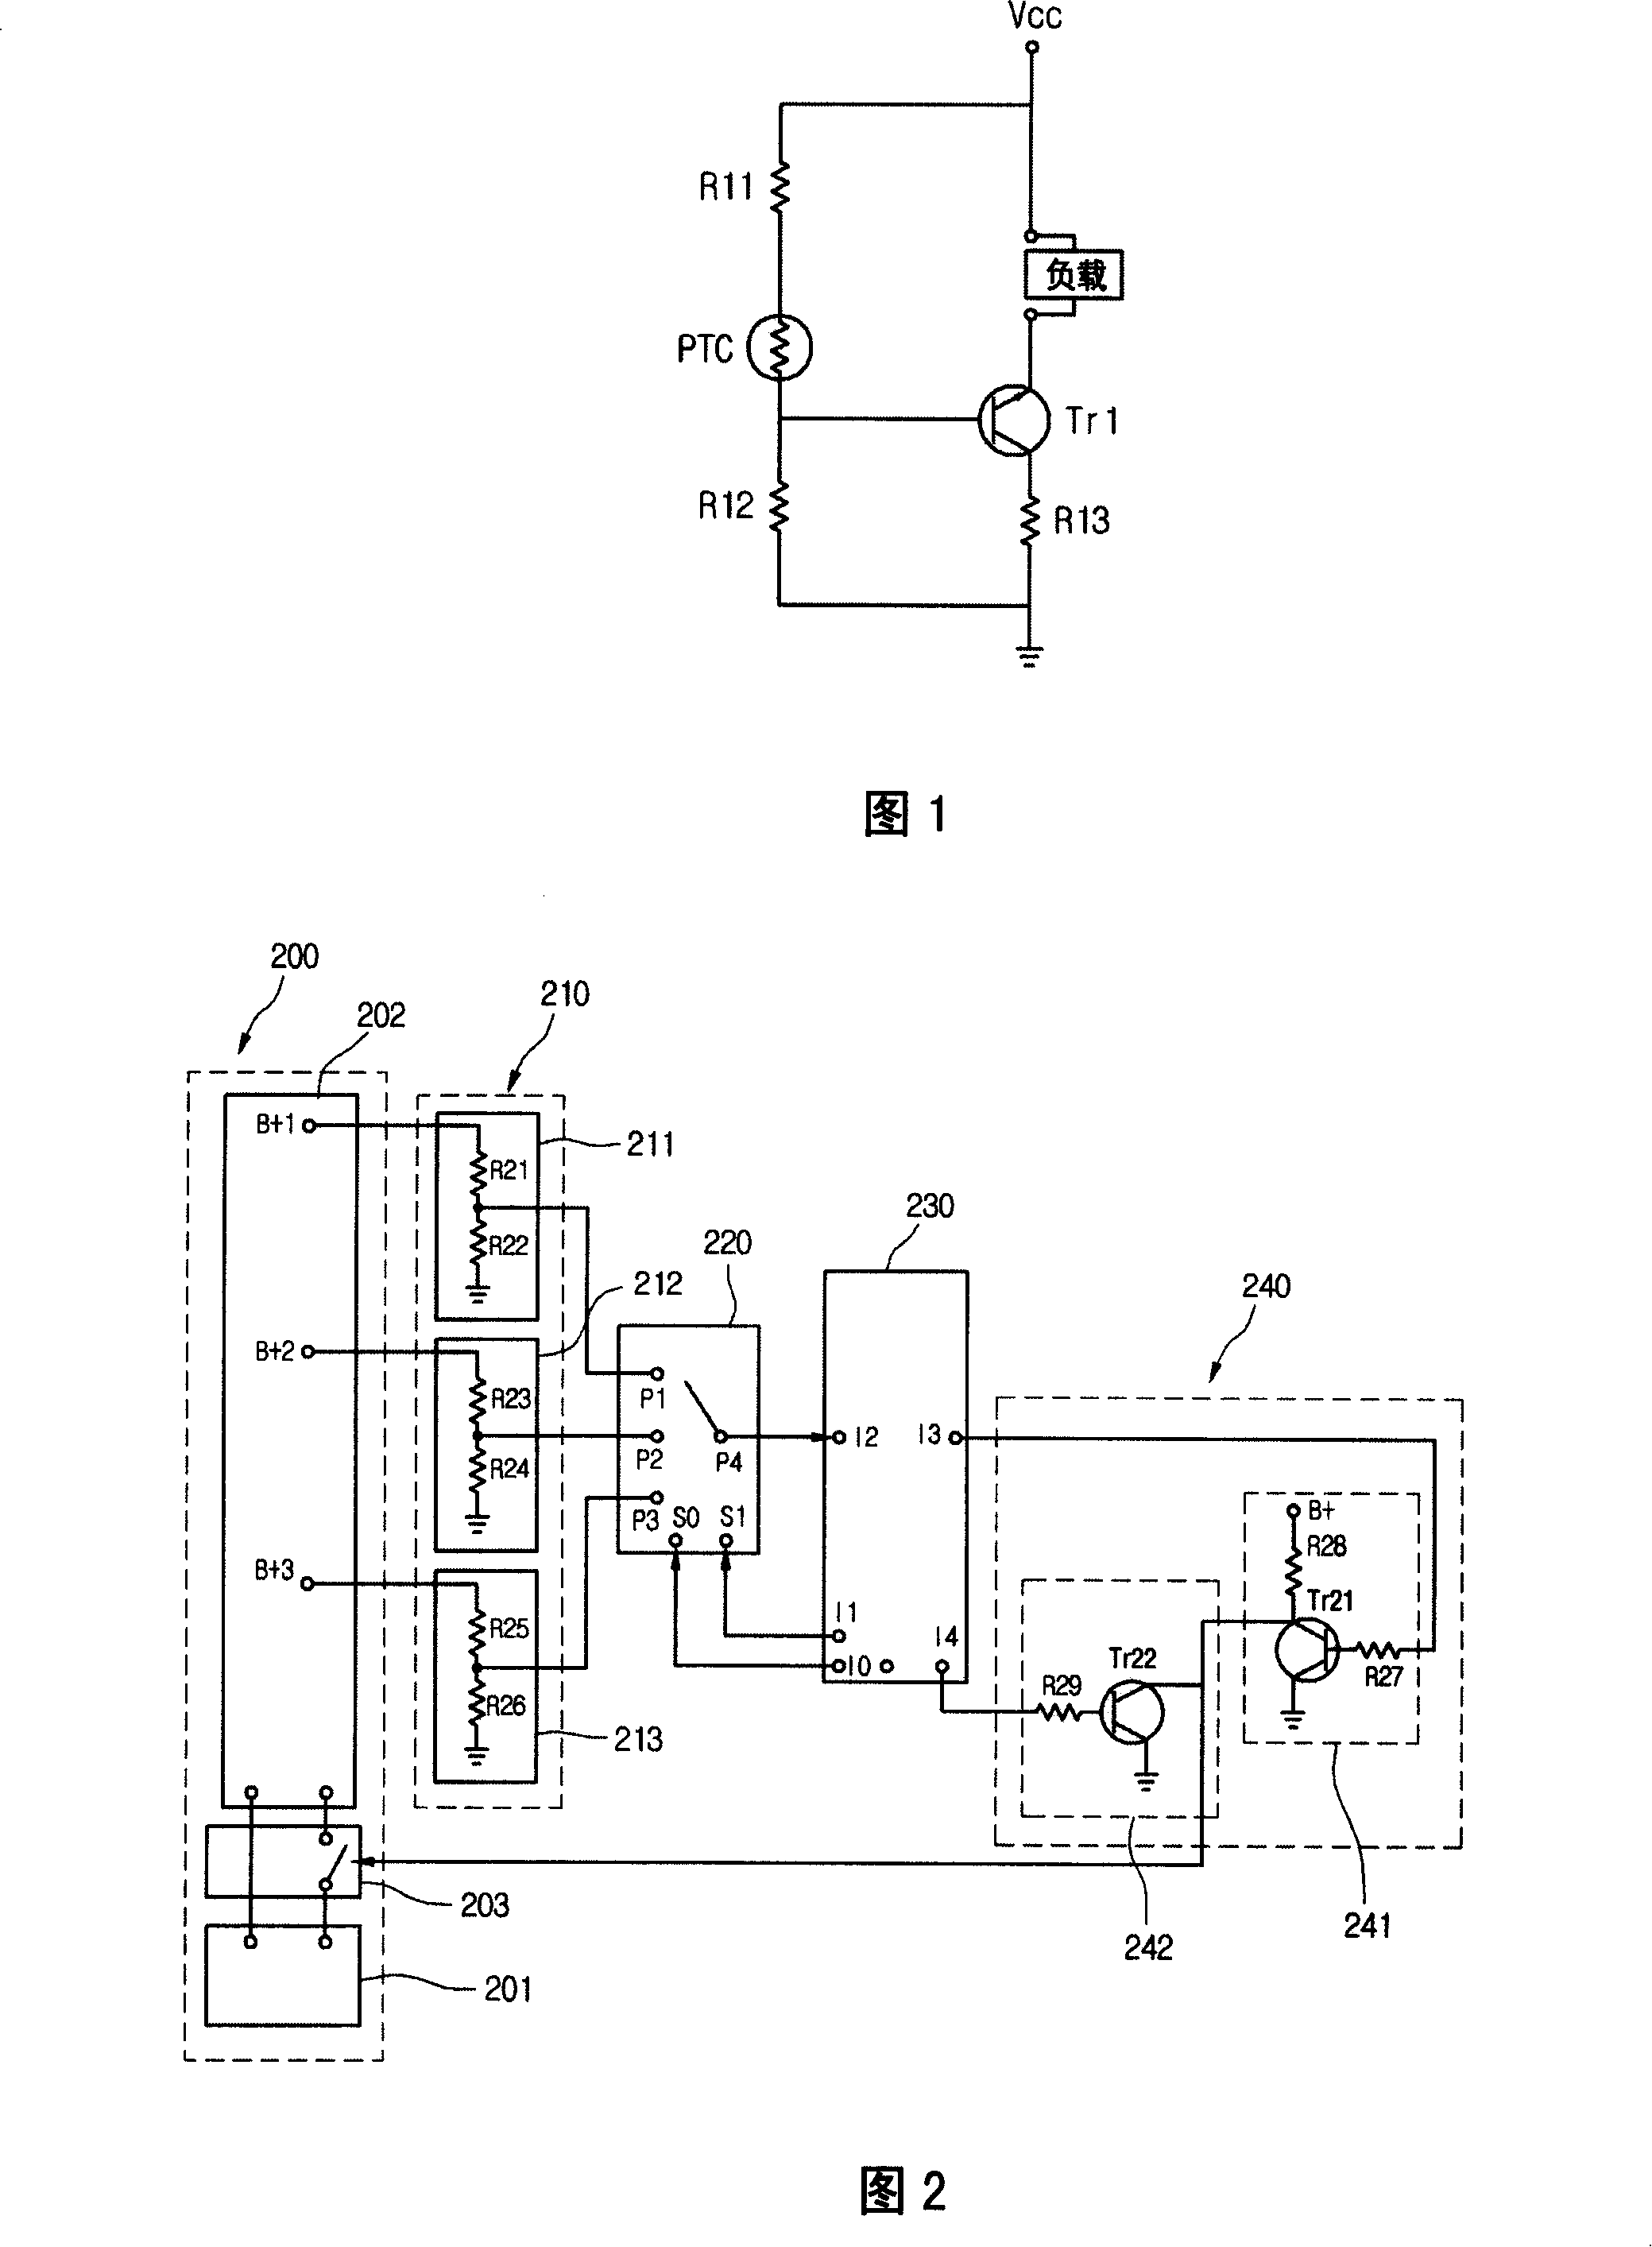 Over-heat protection device of electronic device